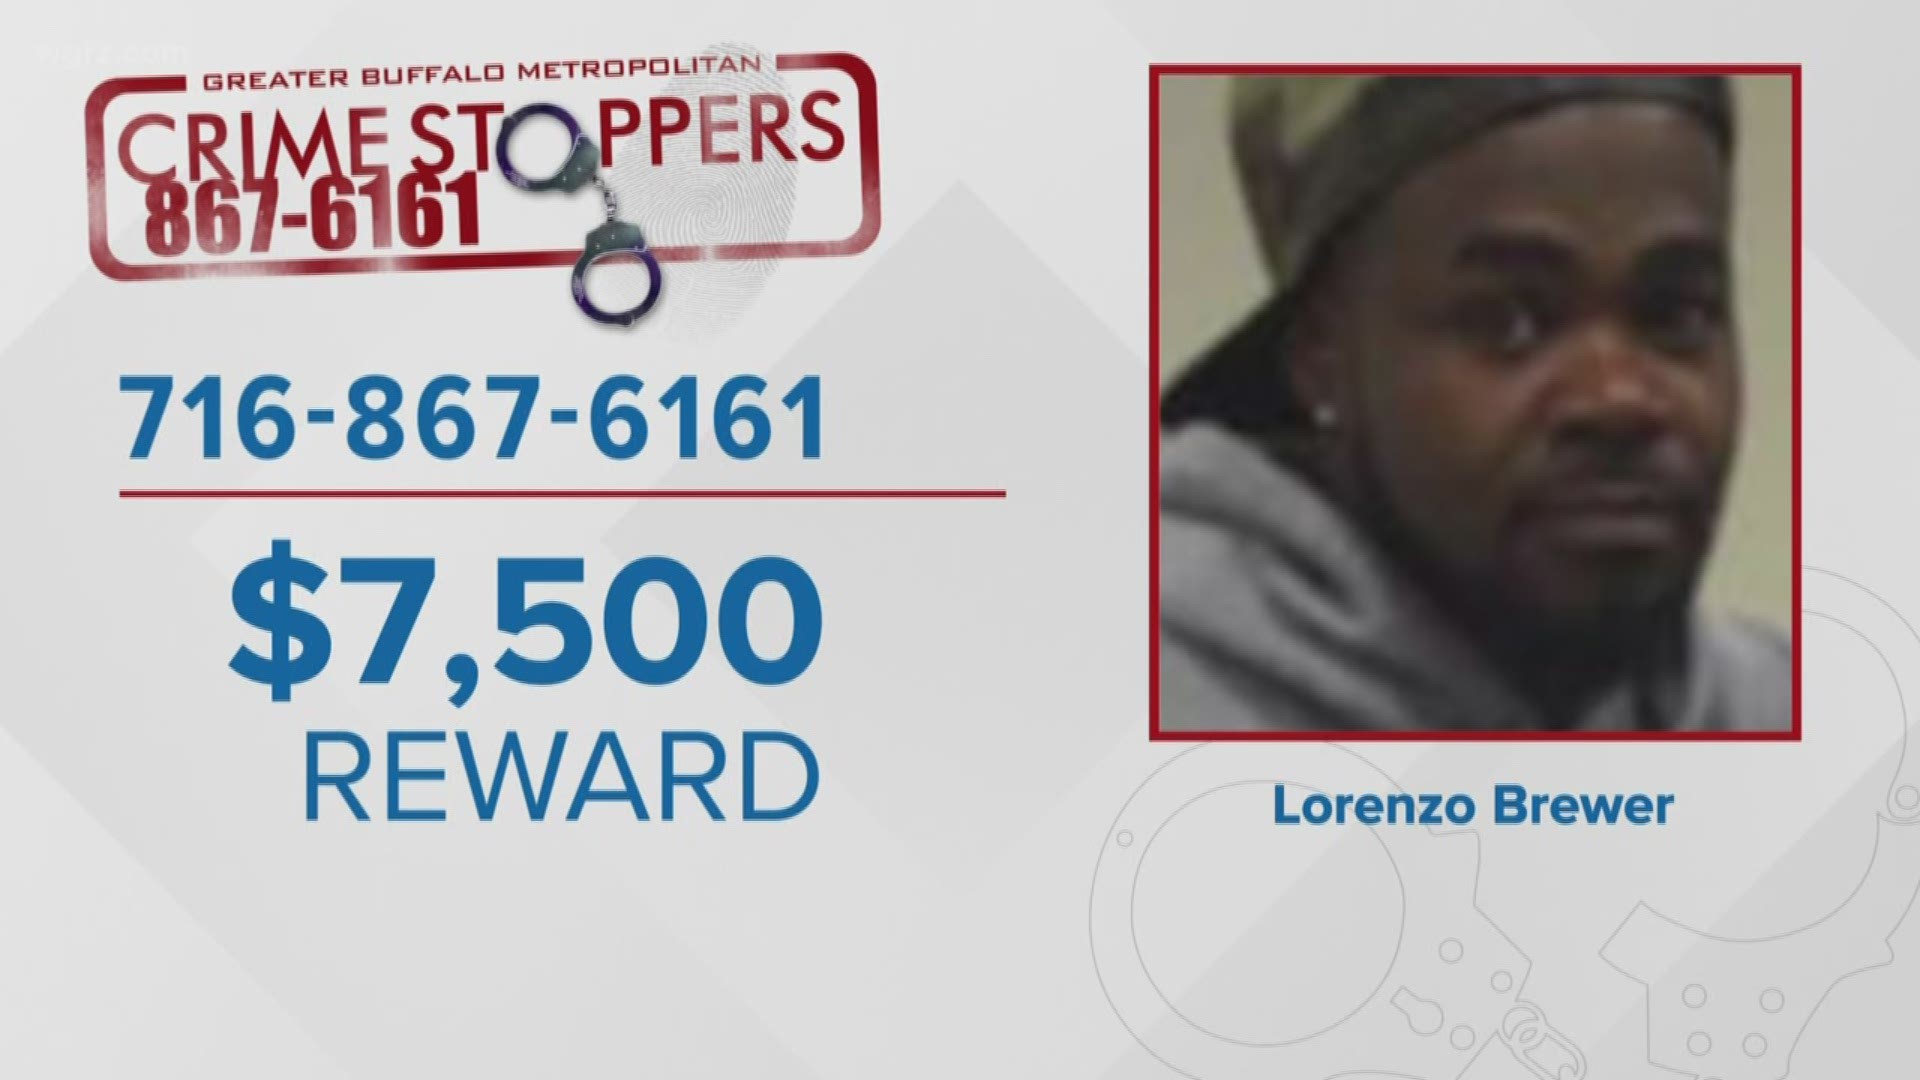 Up to $7,500 is being offered for information leading to the arrest of whomever shot and killed Lorenzo Brewer on Inter Park Avenue on September 29.